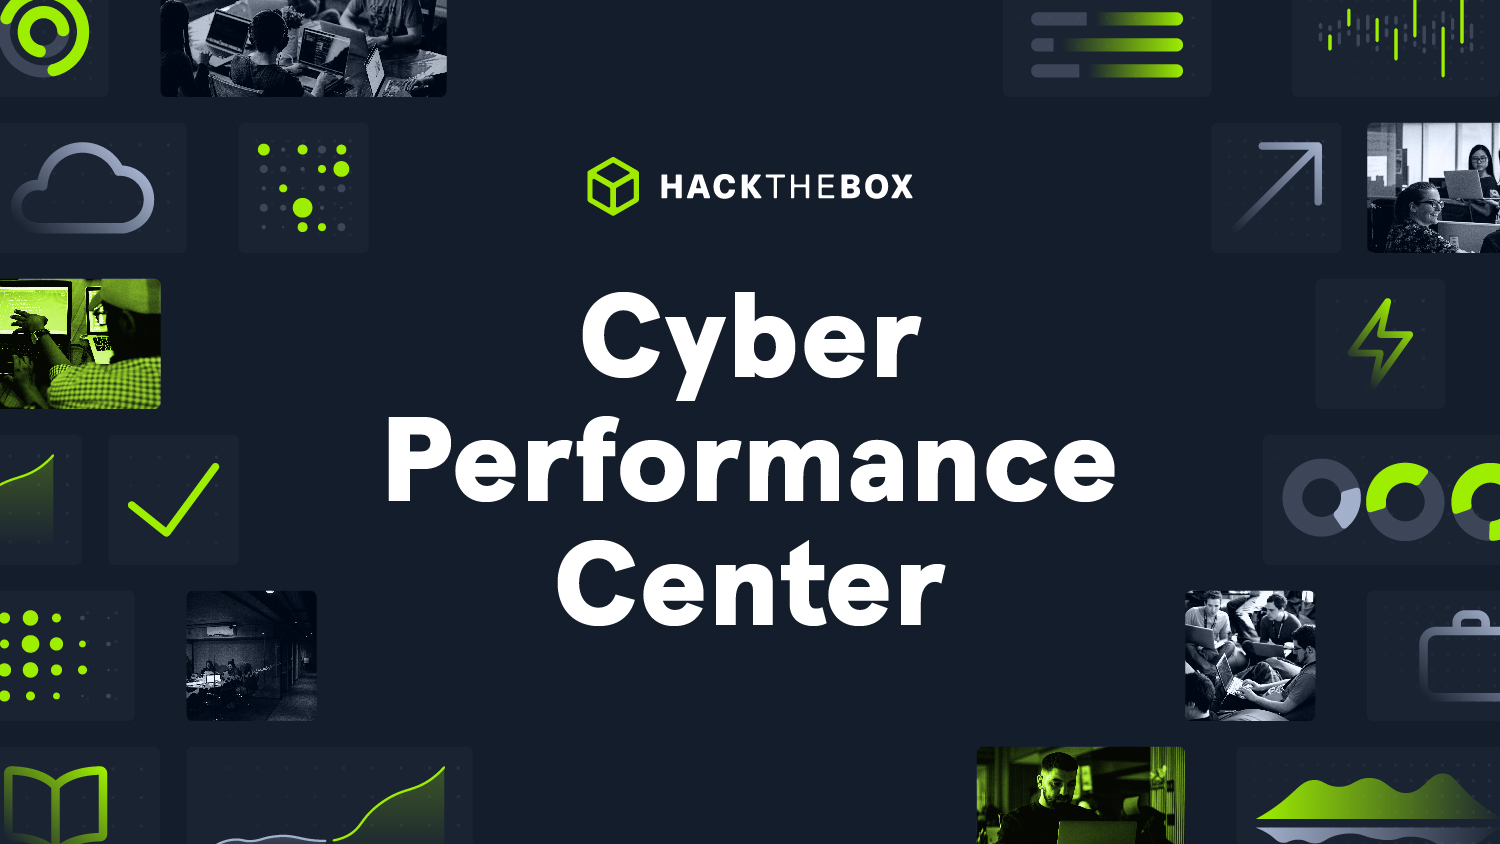 Hack The Box Redefines Cybersecurity Performance, Setting New Standards in the Cyber Readiness of Organizations